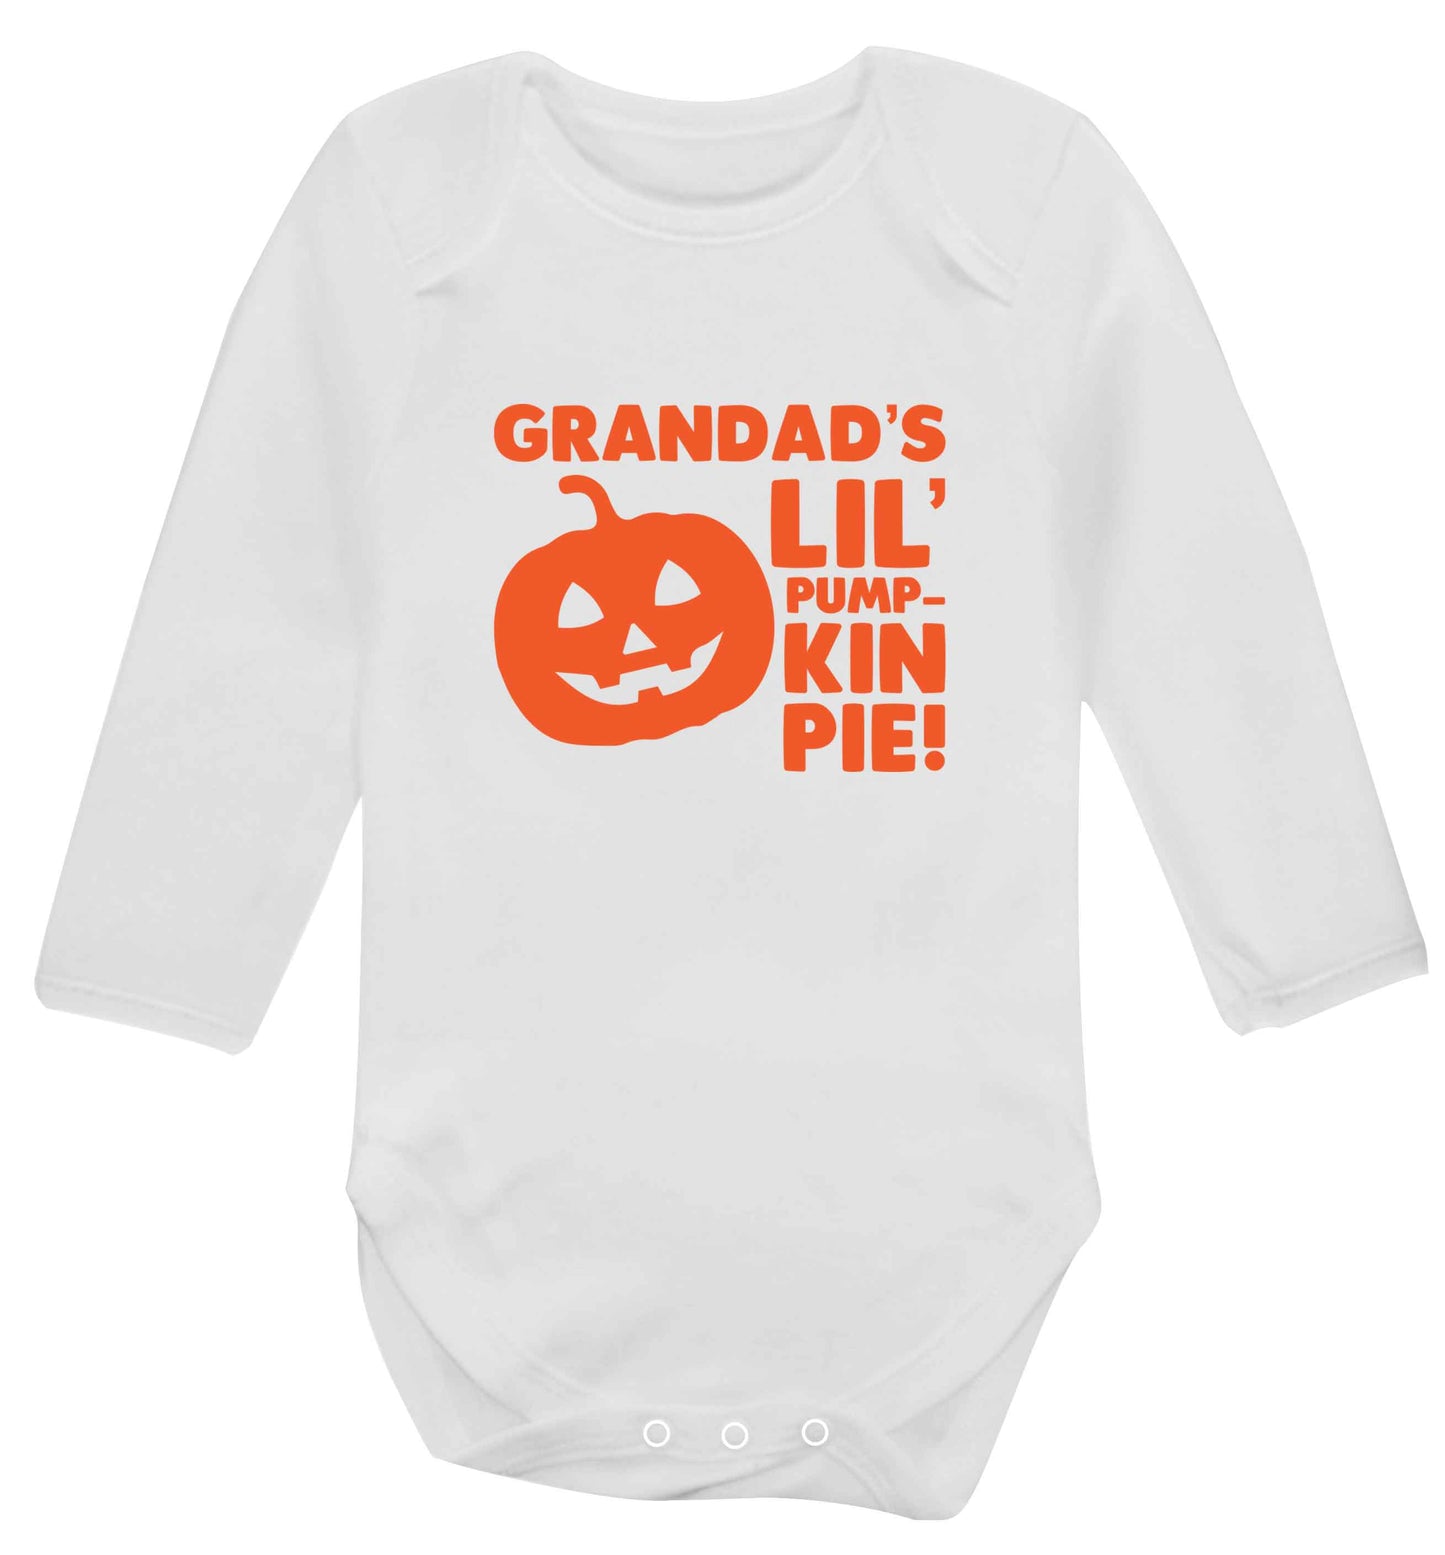 Daddy's lil' pumpkin pie baby vest long sleeved white 6-12 months